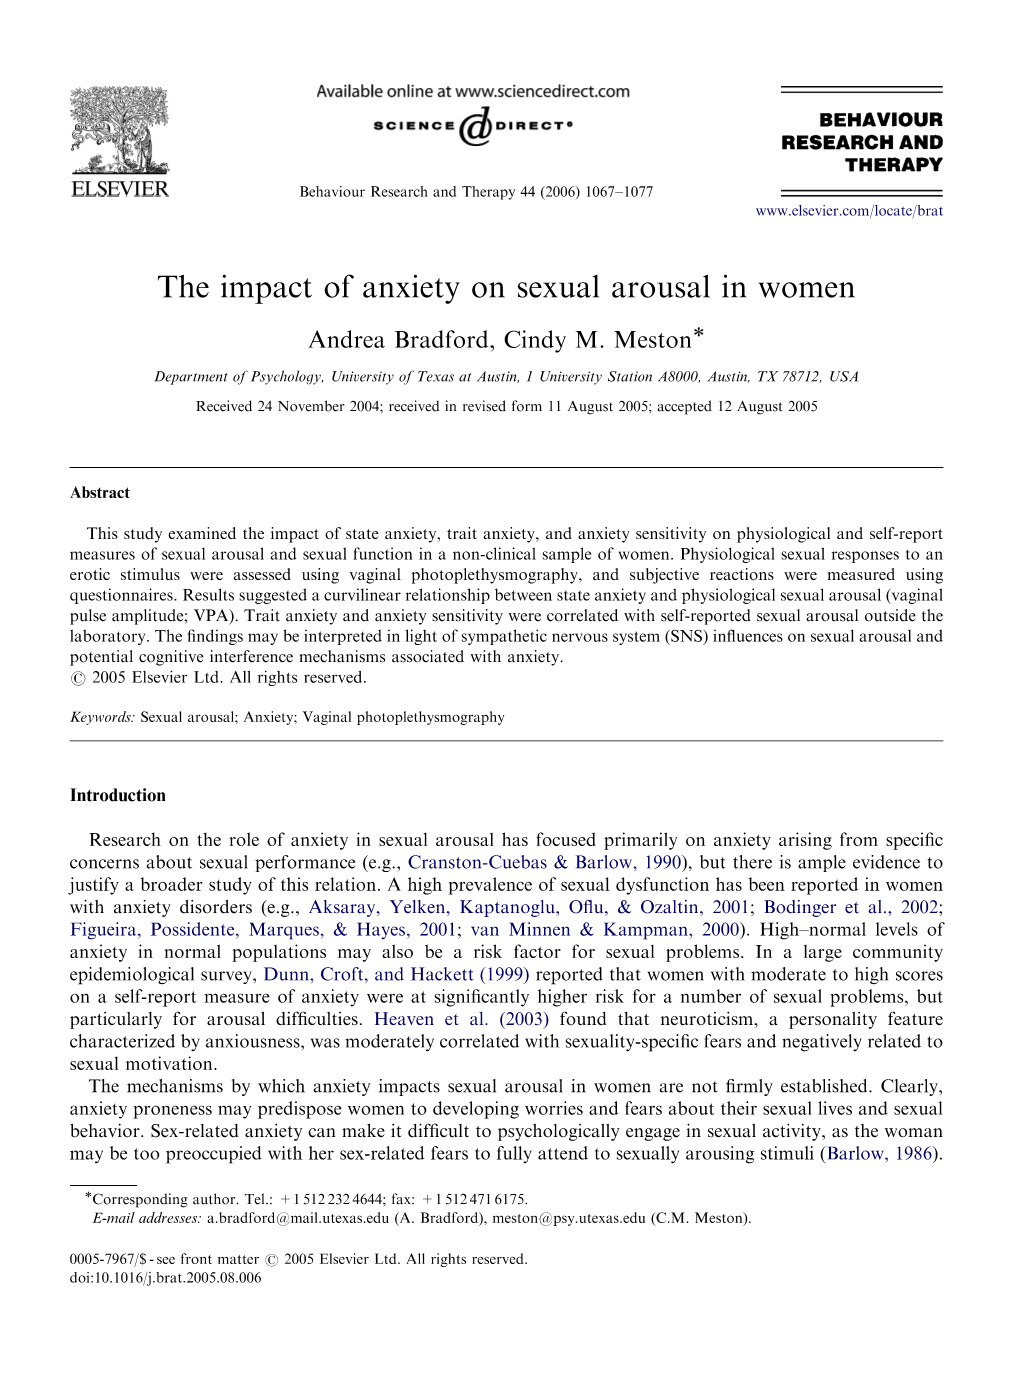 The Impact of Anxiety on Sexual Arousal in Women